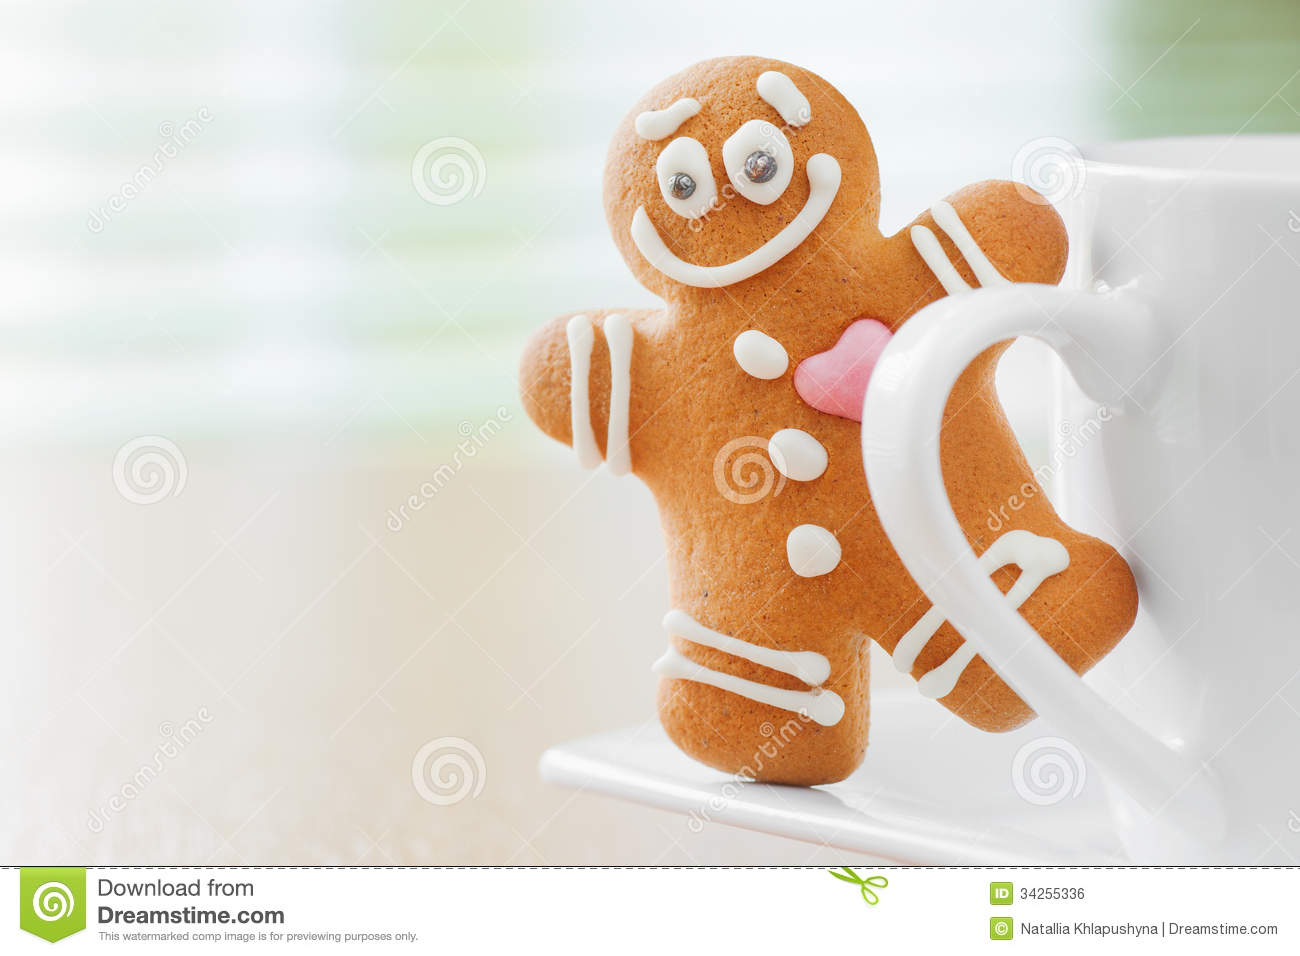 Funny Gingerbread Man Royalty Free Stock Image   Image  34255336